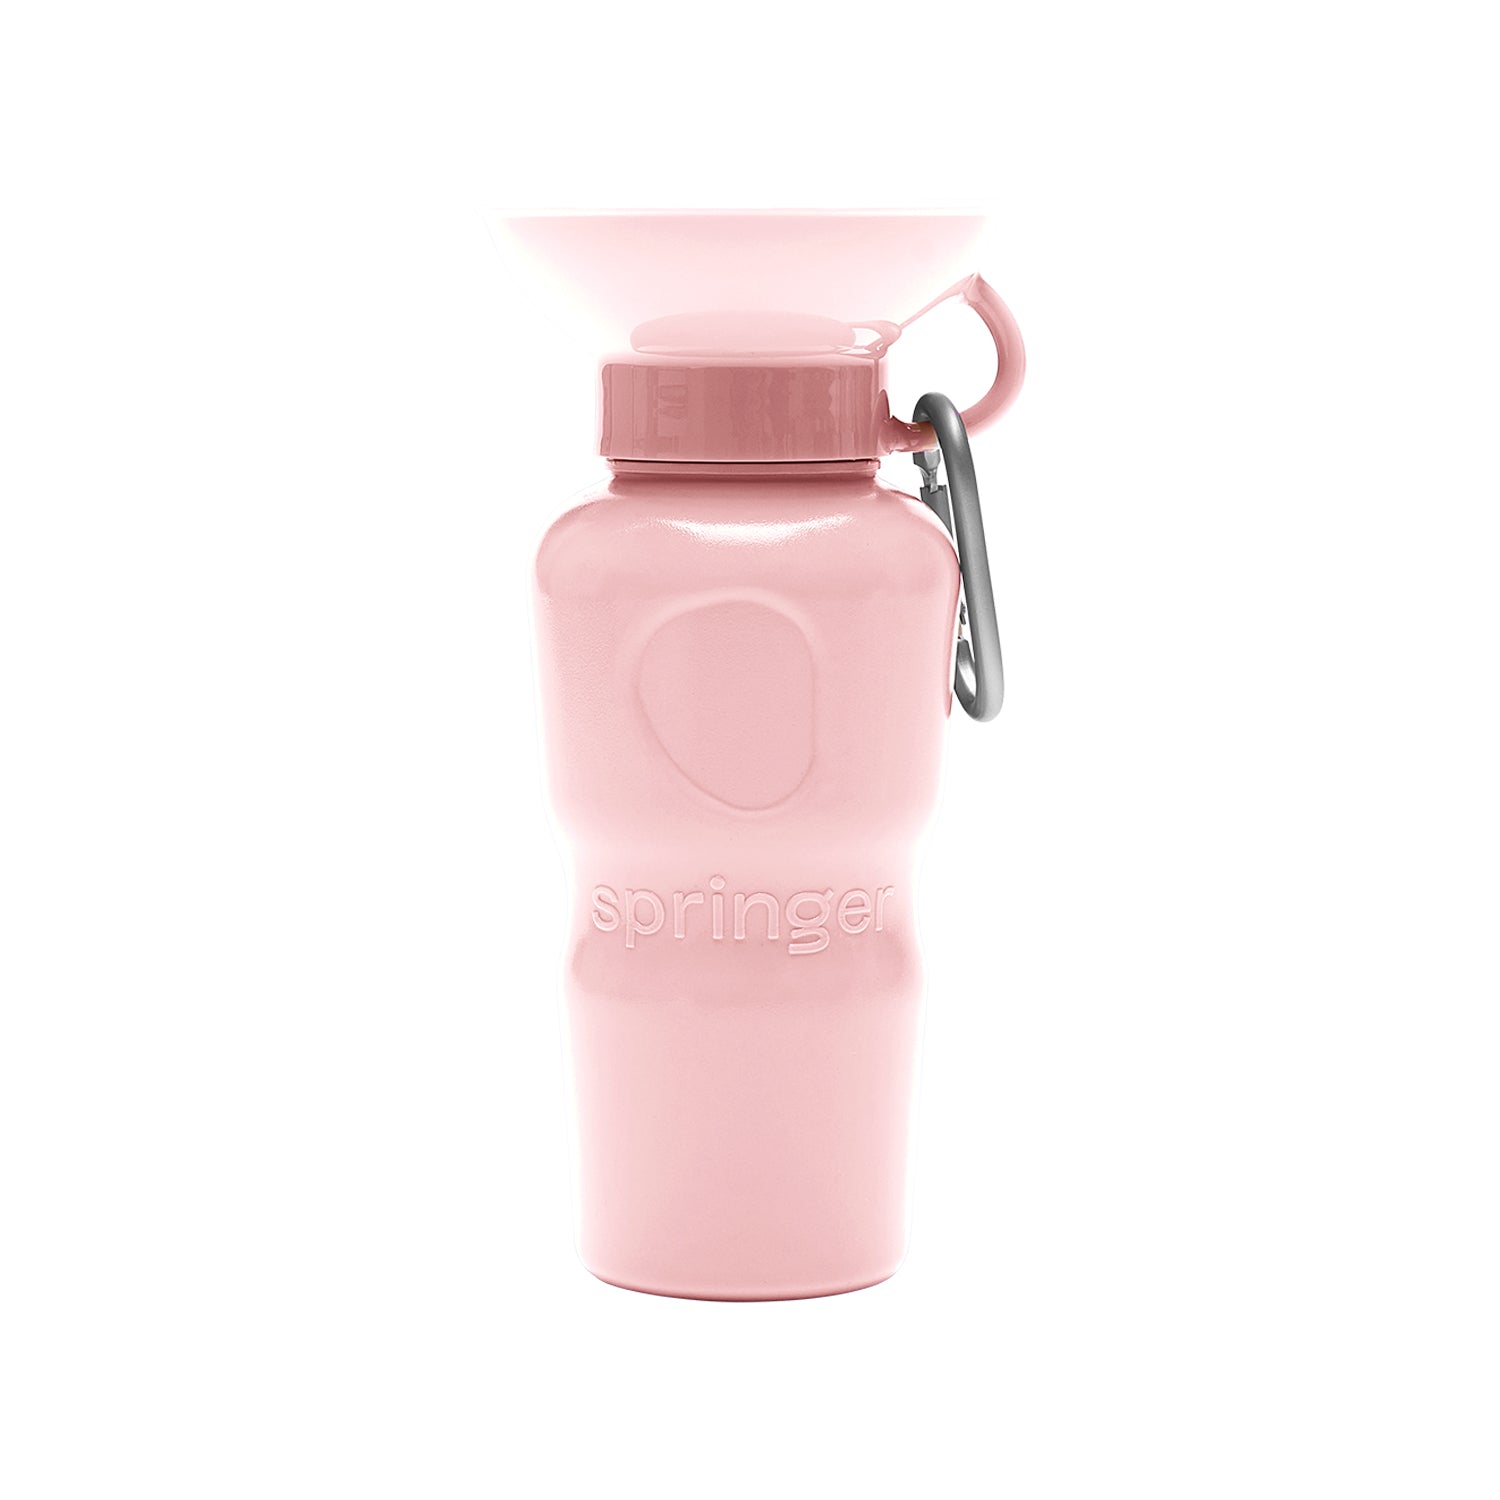 Classic travel bottle in pink